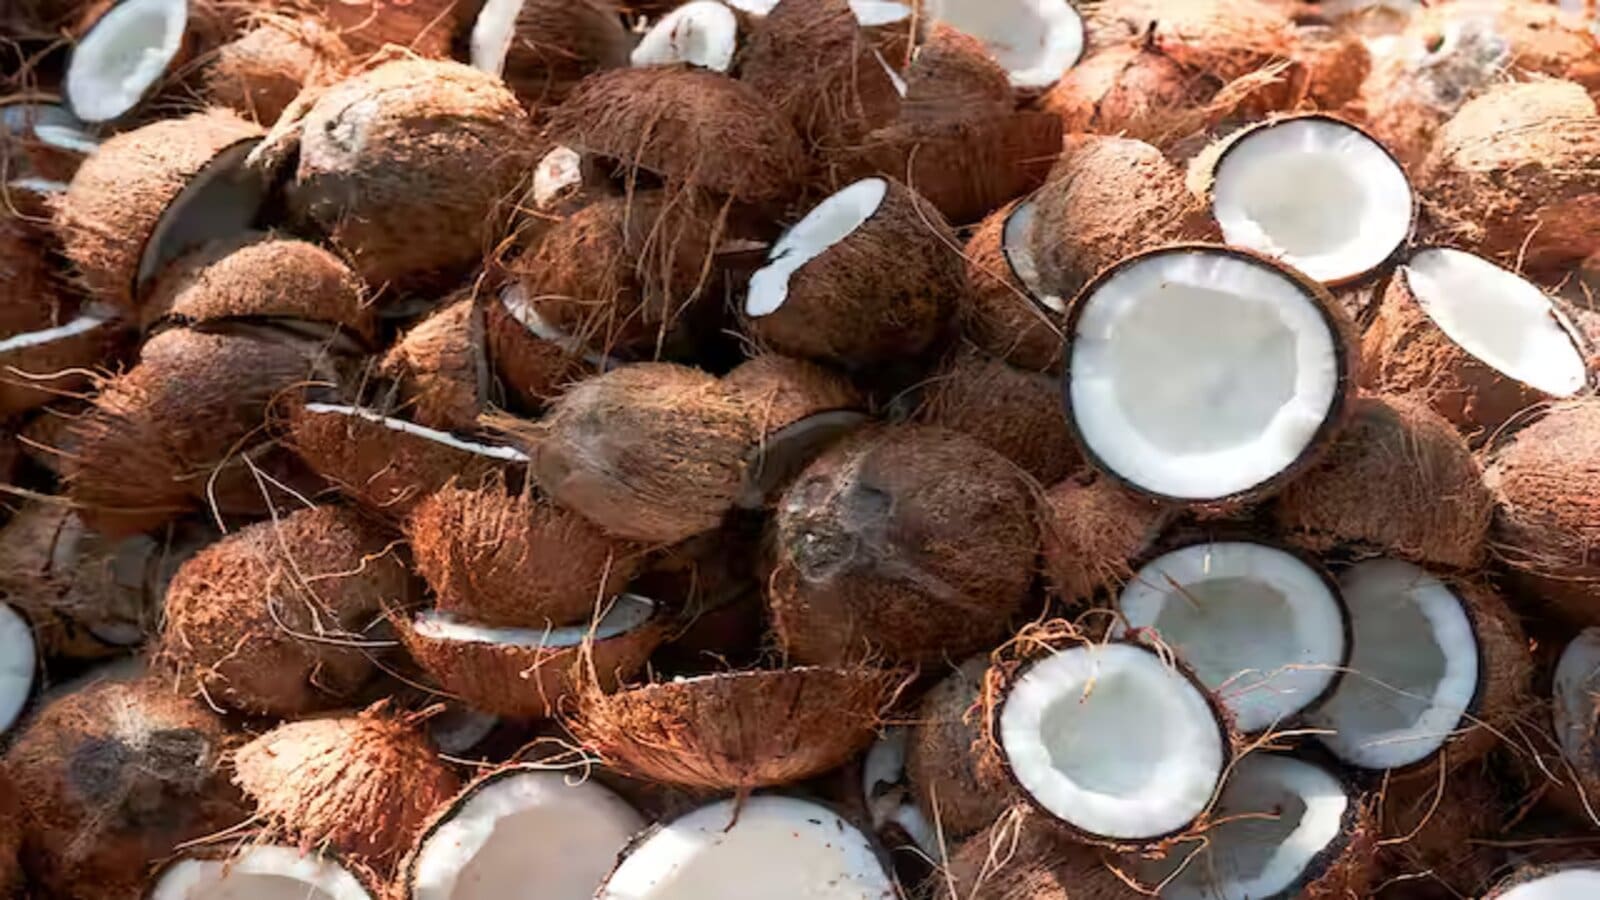 The World Bank invests US$200M to upscale coconut, cashew  production in Ghana